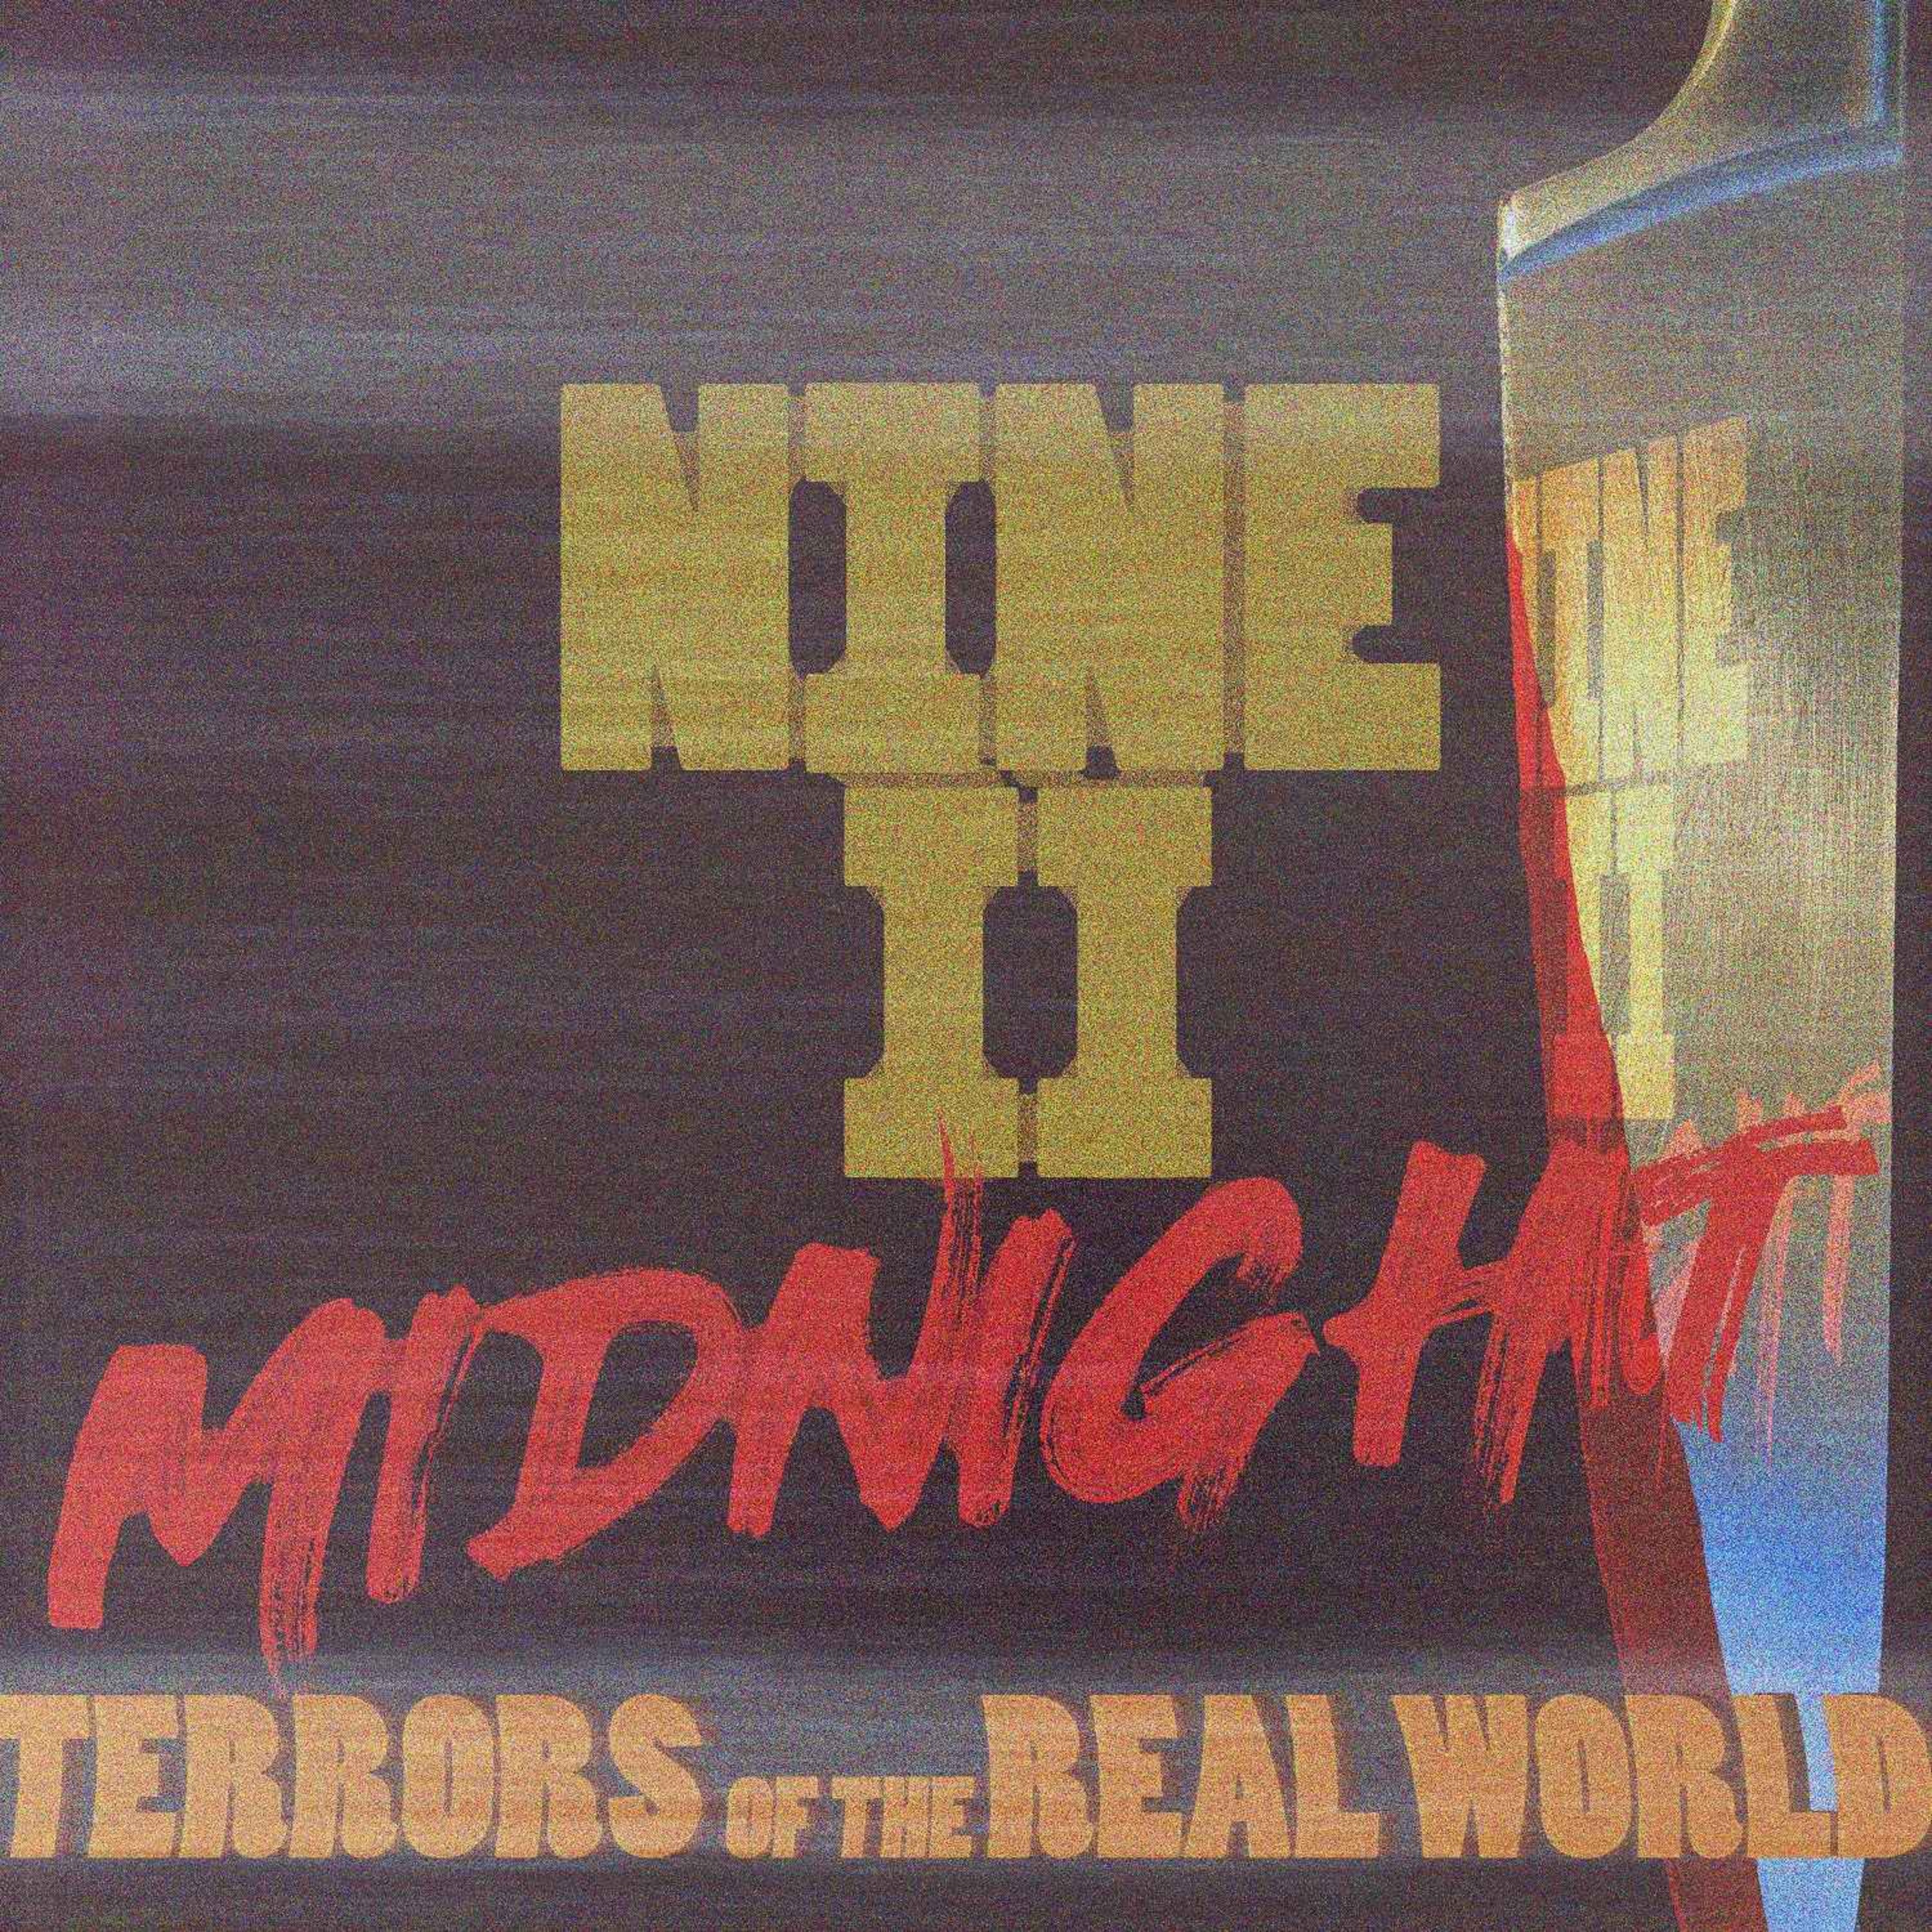 cover art for NINE II MIDNIGHT - Terrors of the Real World